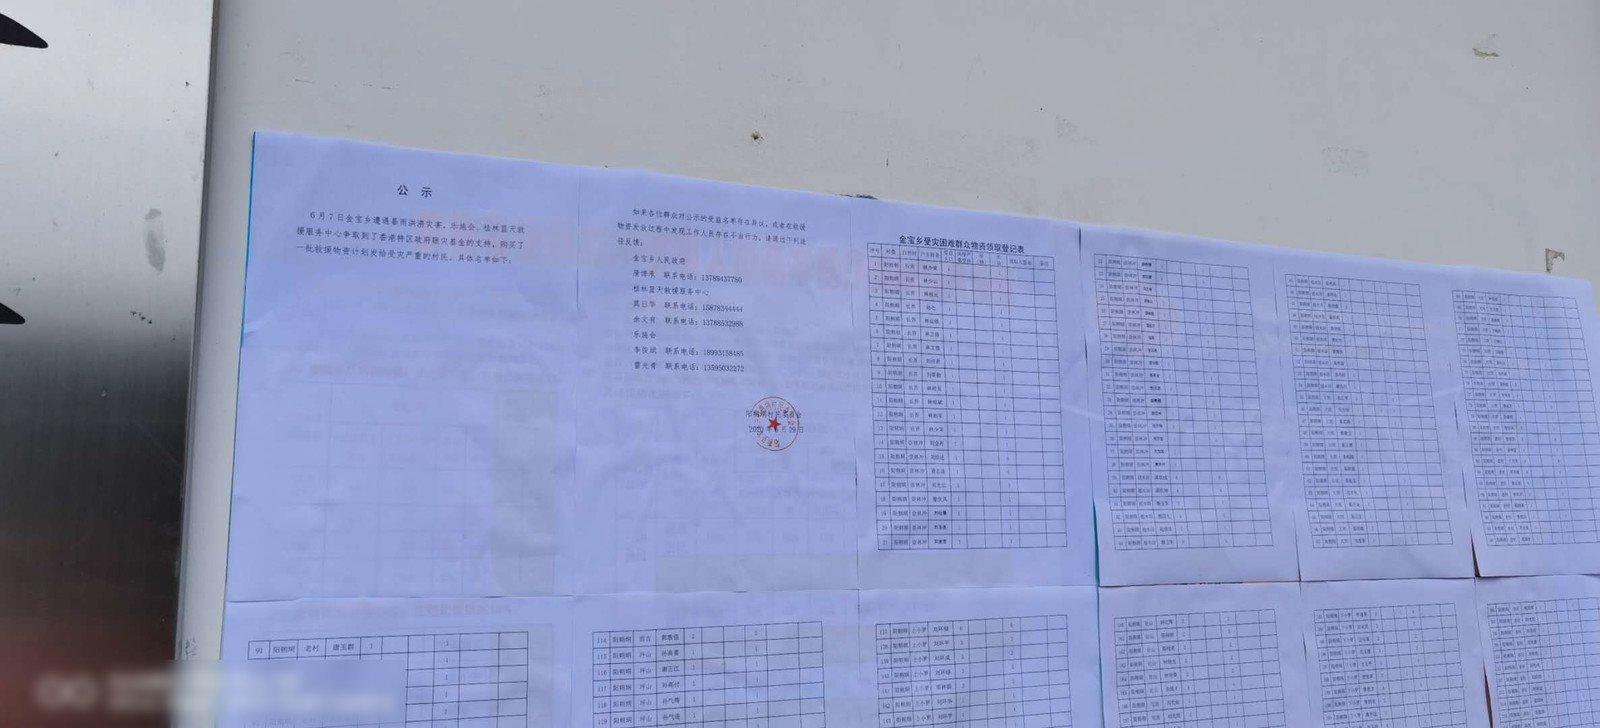 Whenever relief items are given to survivors, recipients sign a distribution record, and details of the items that are distributed in the village are publicised.